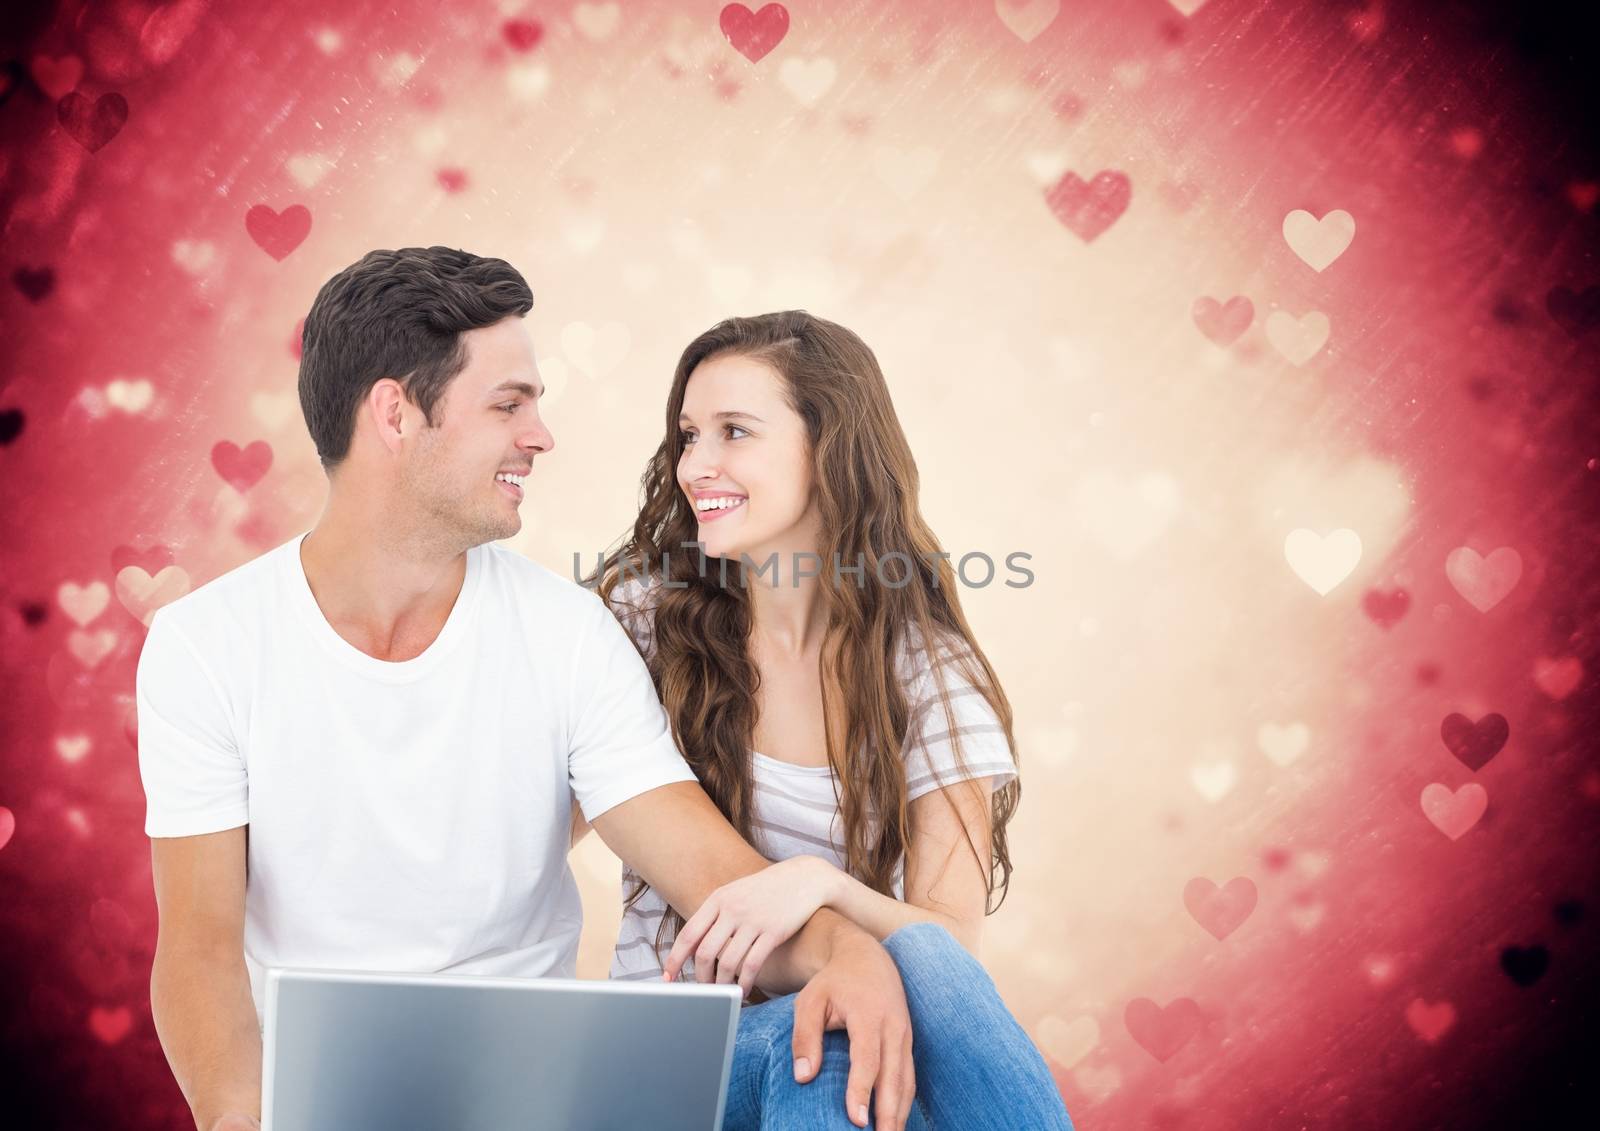 Romantic couple sitting together against digitally generated background